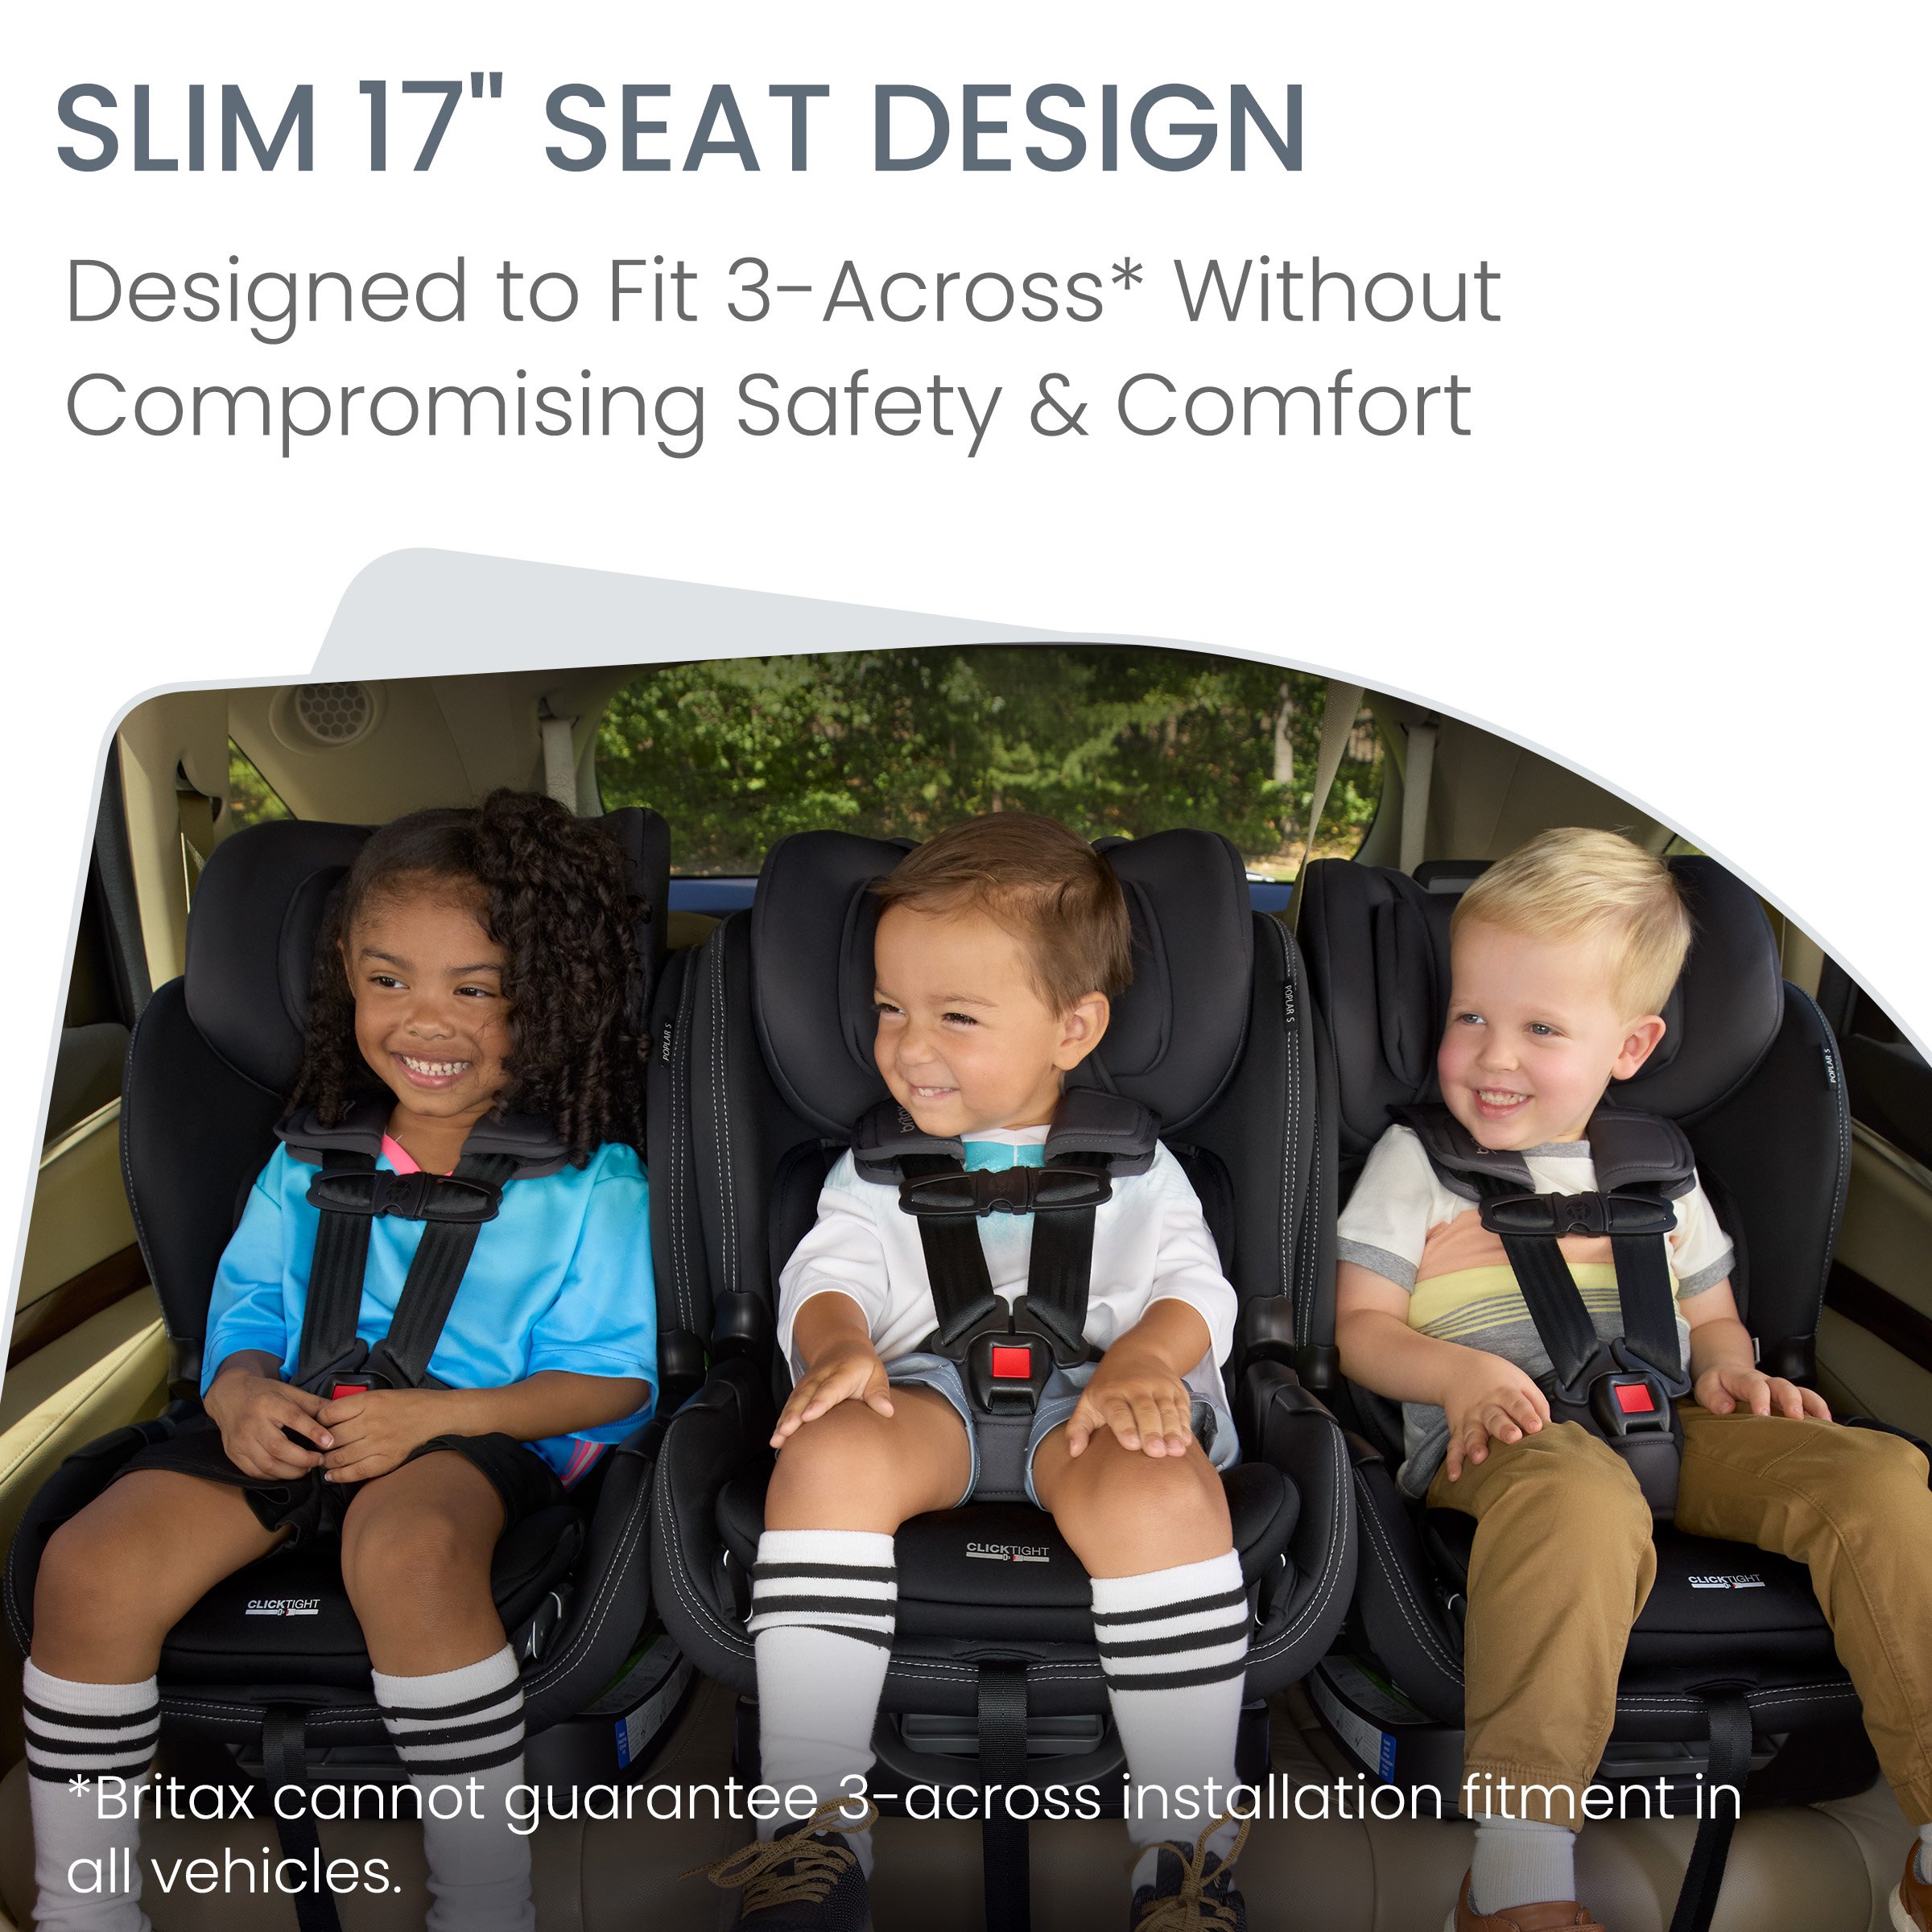 Slim 17-inch seat. Designed to fit 3 across. Britax cannot guarantee 3-across installation fitment all vehicles.  